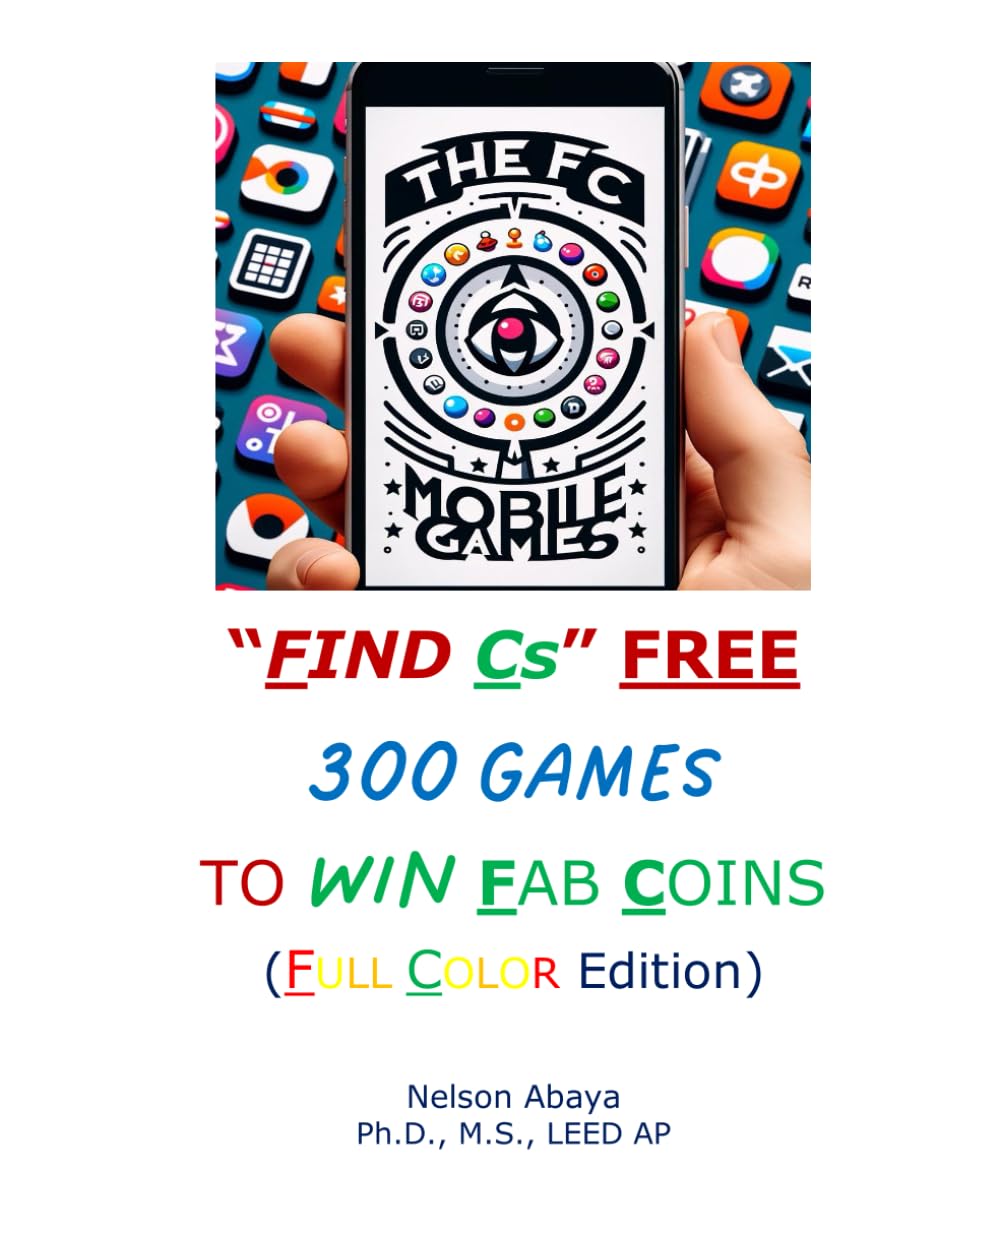 The FC Mobile Games